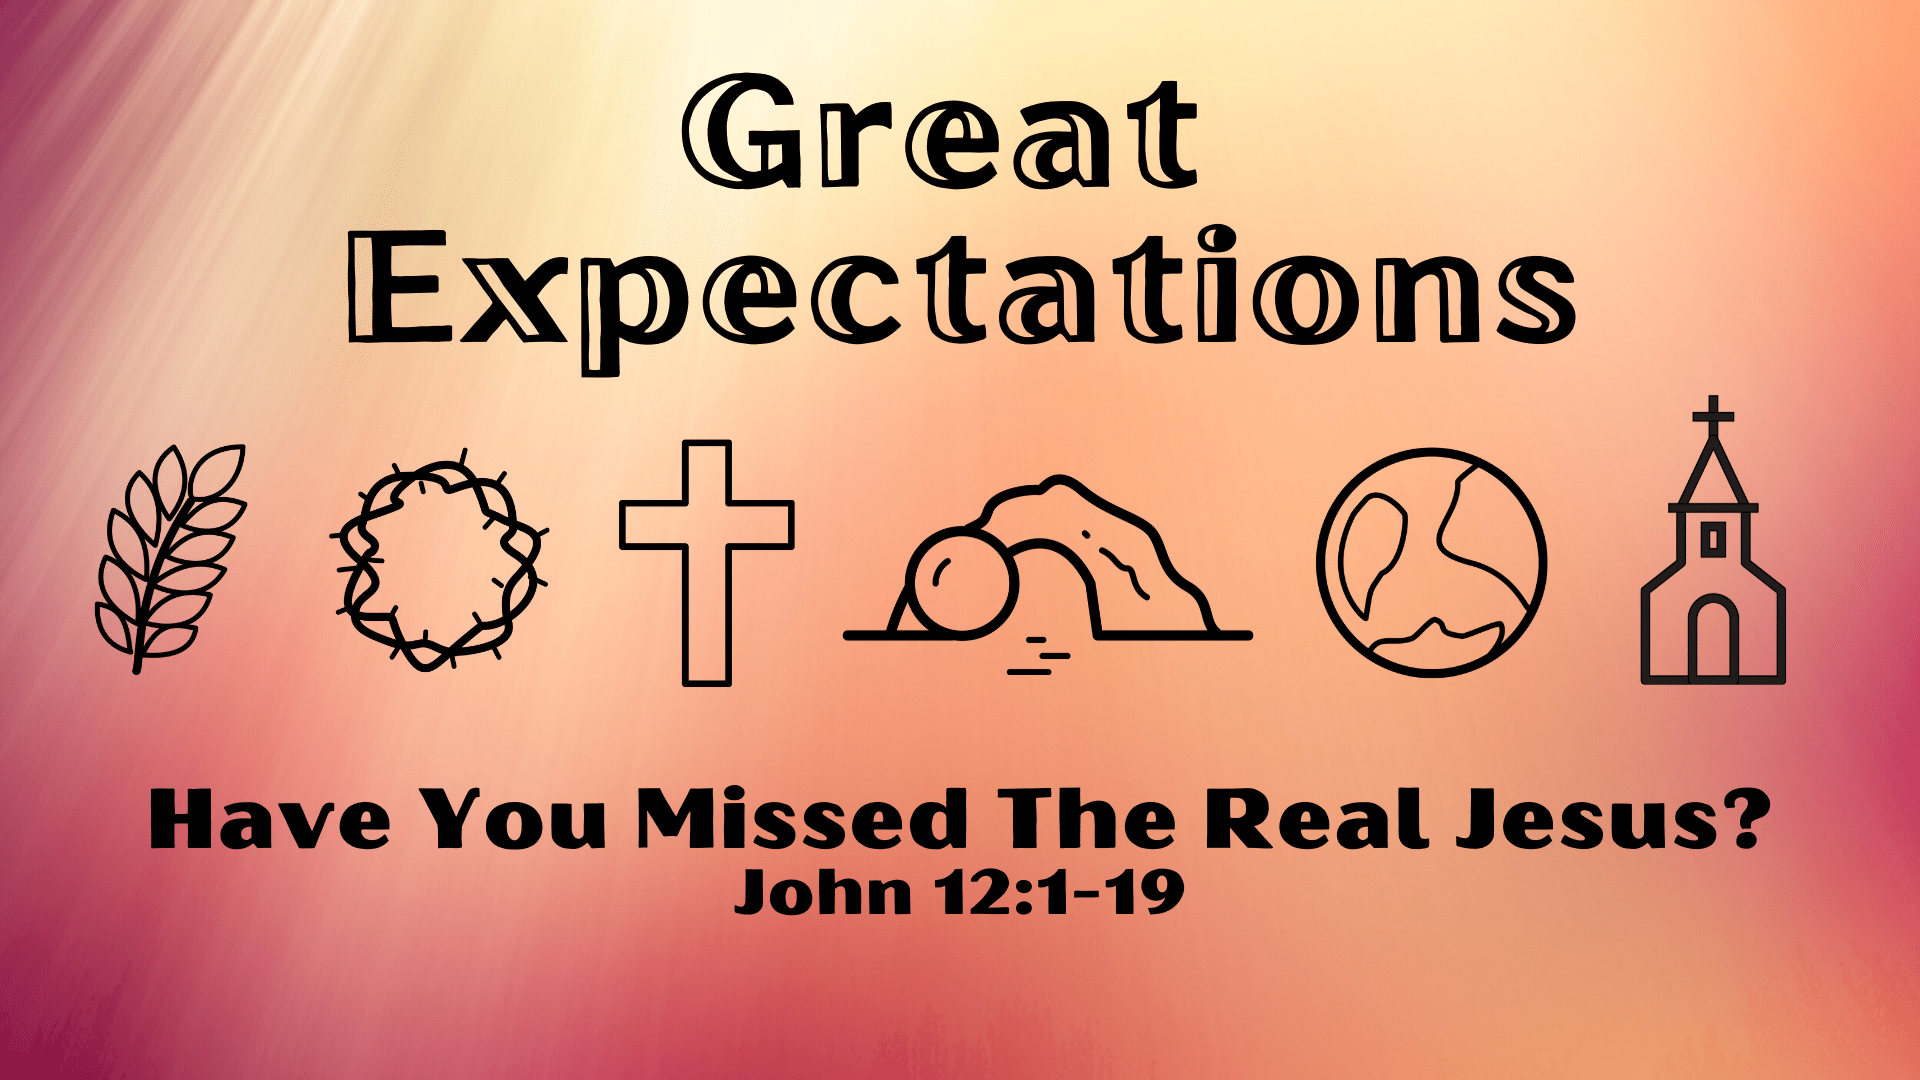 Great Expectations: Have You Missed The Real Jesus?